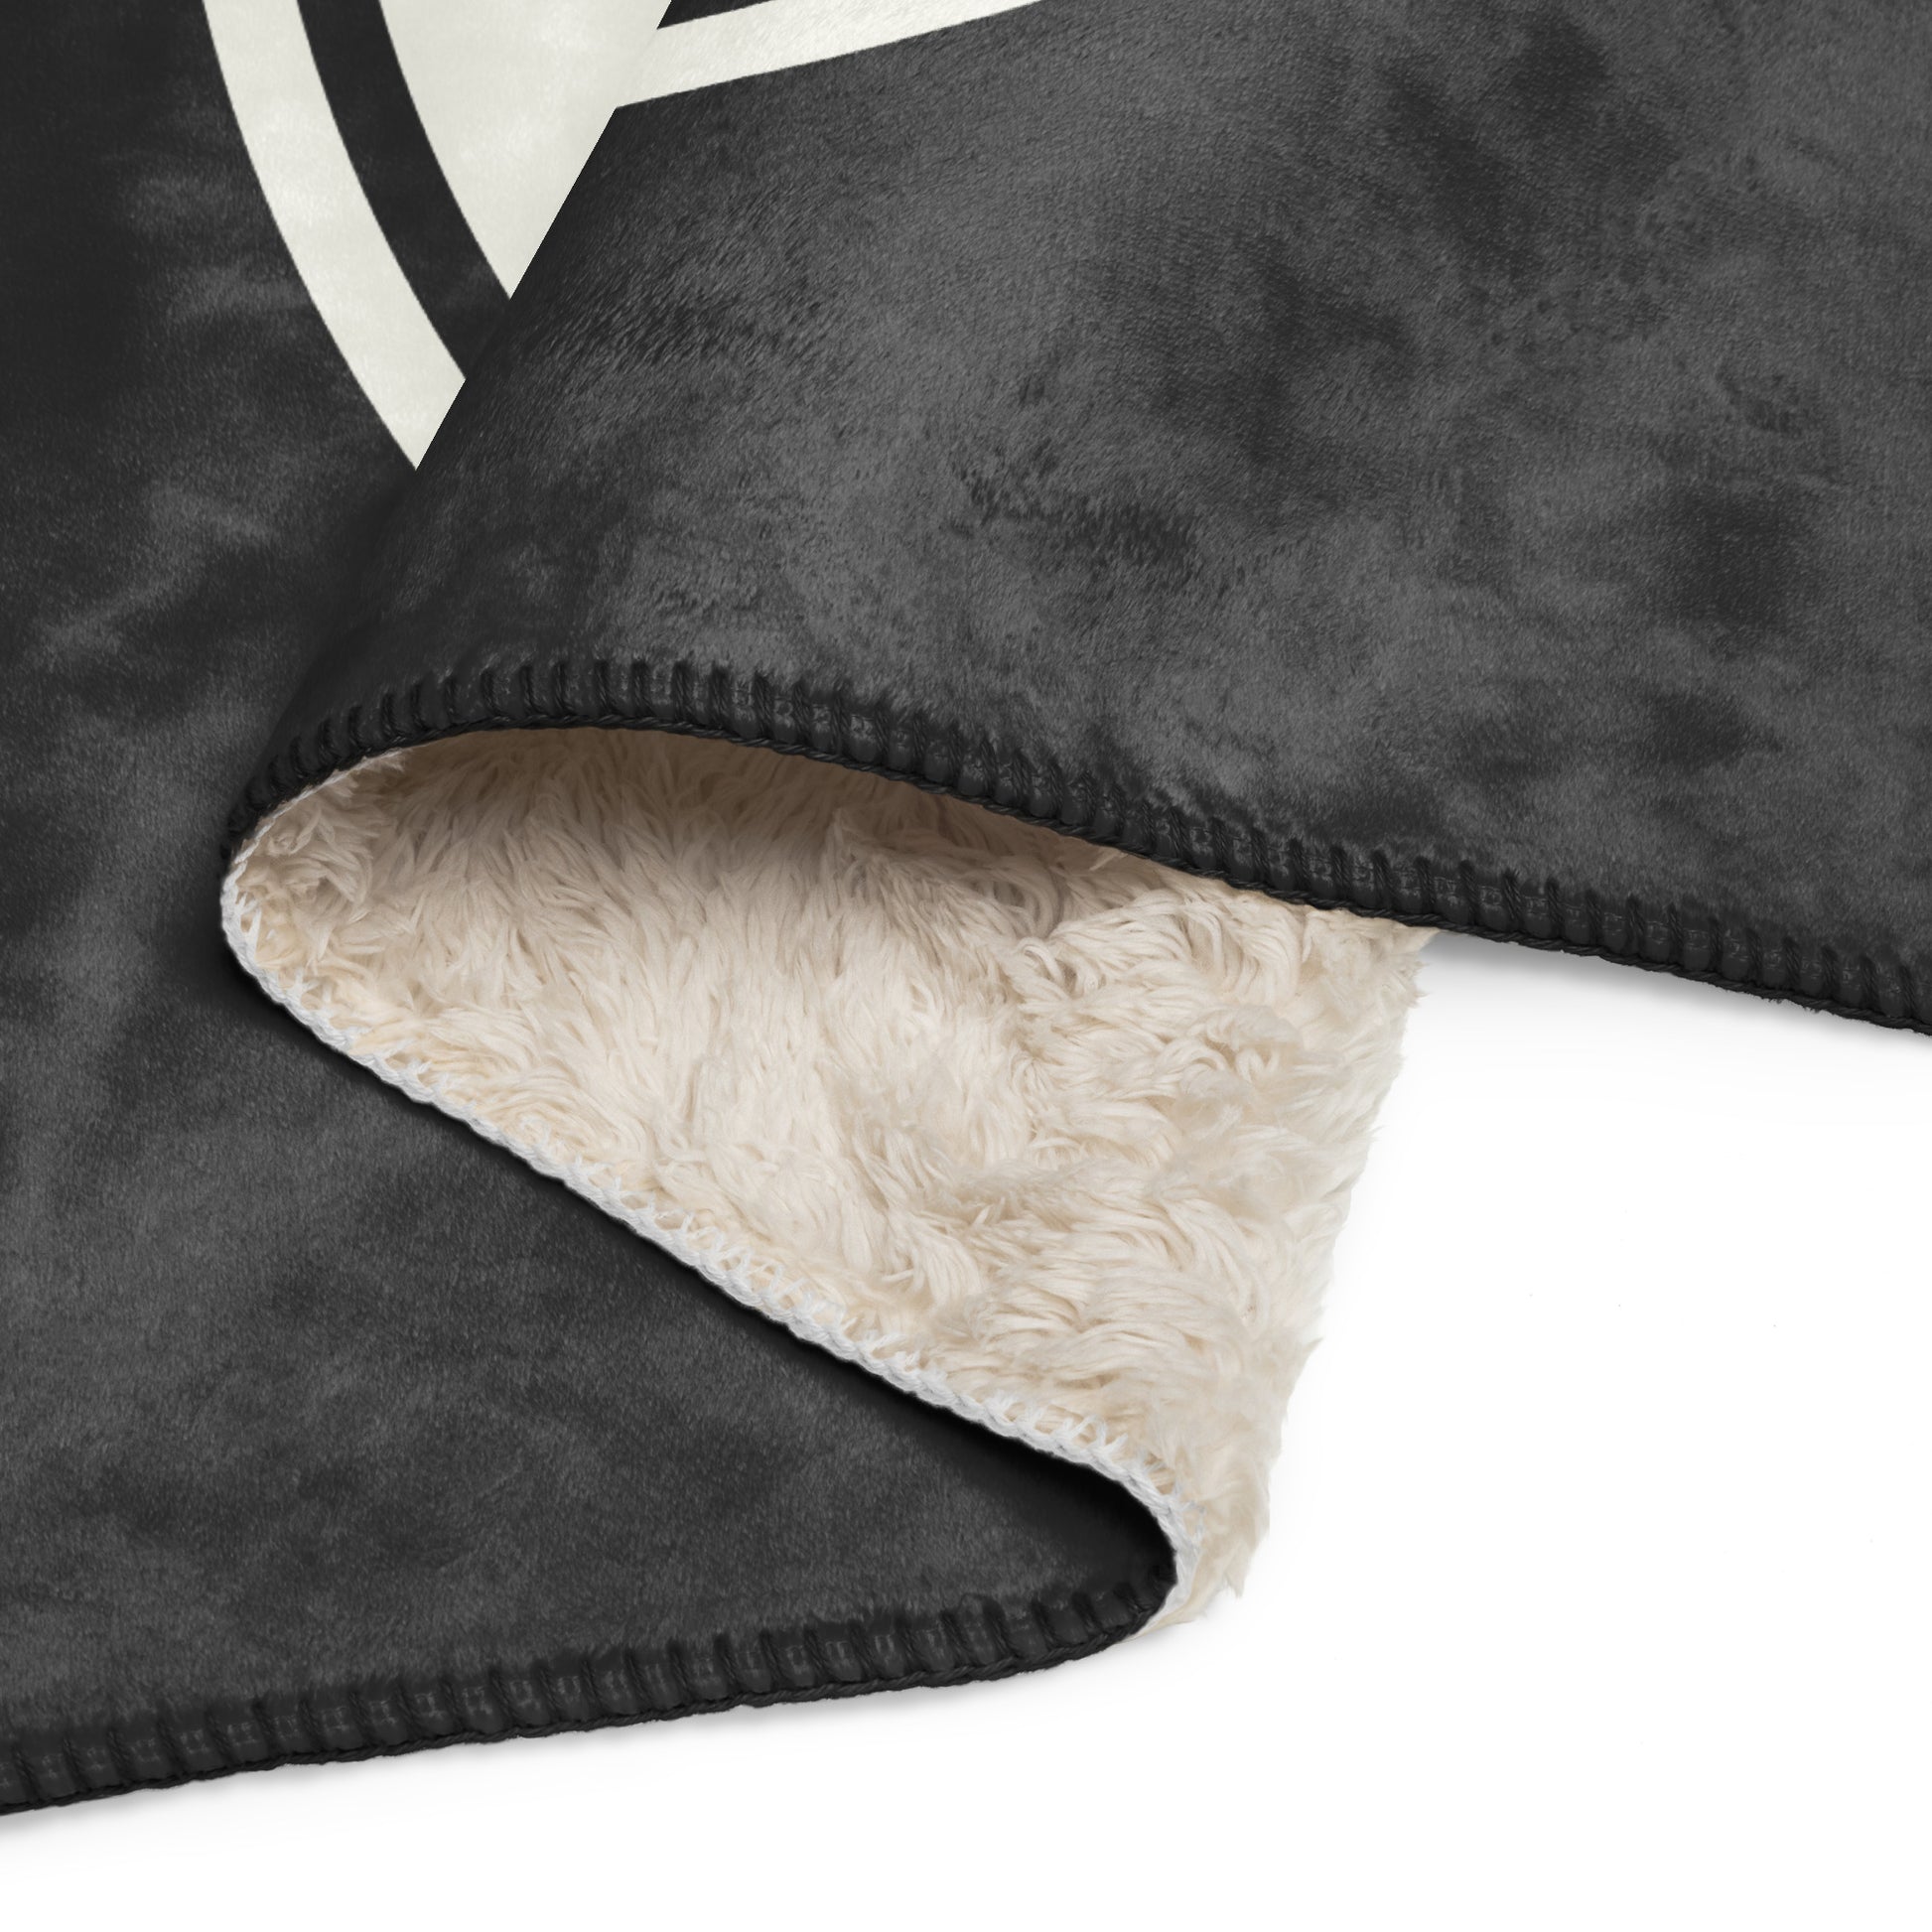 Unique Travel Gift Sherpa Blanket - White Oval • YQM Moncton • YHM Designs - Image 08